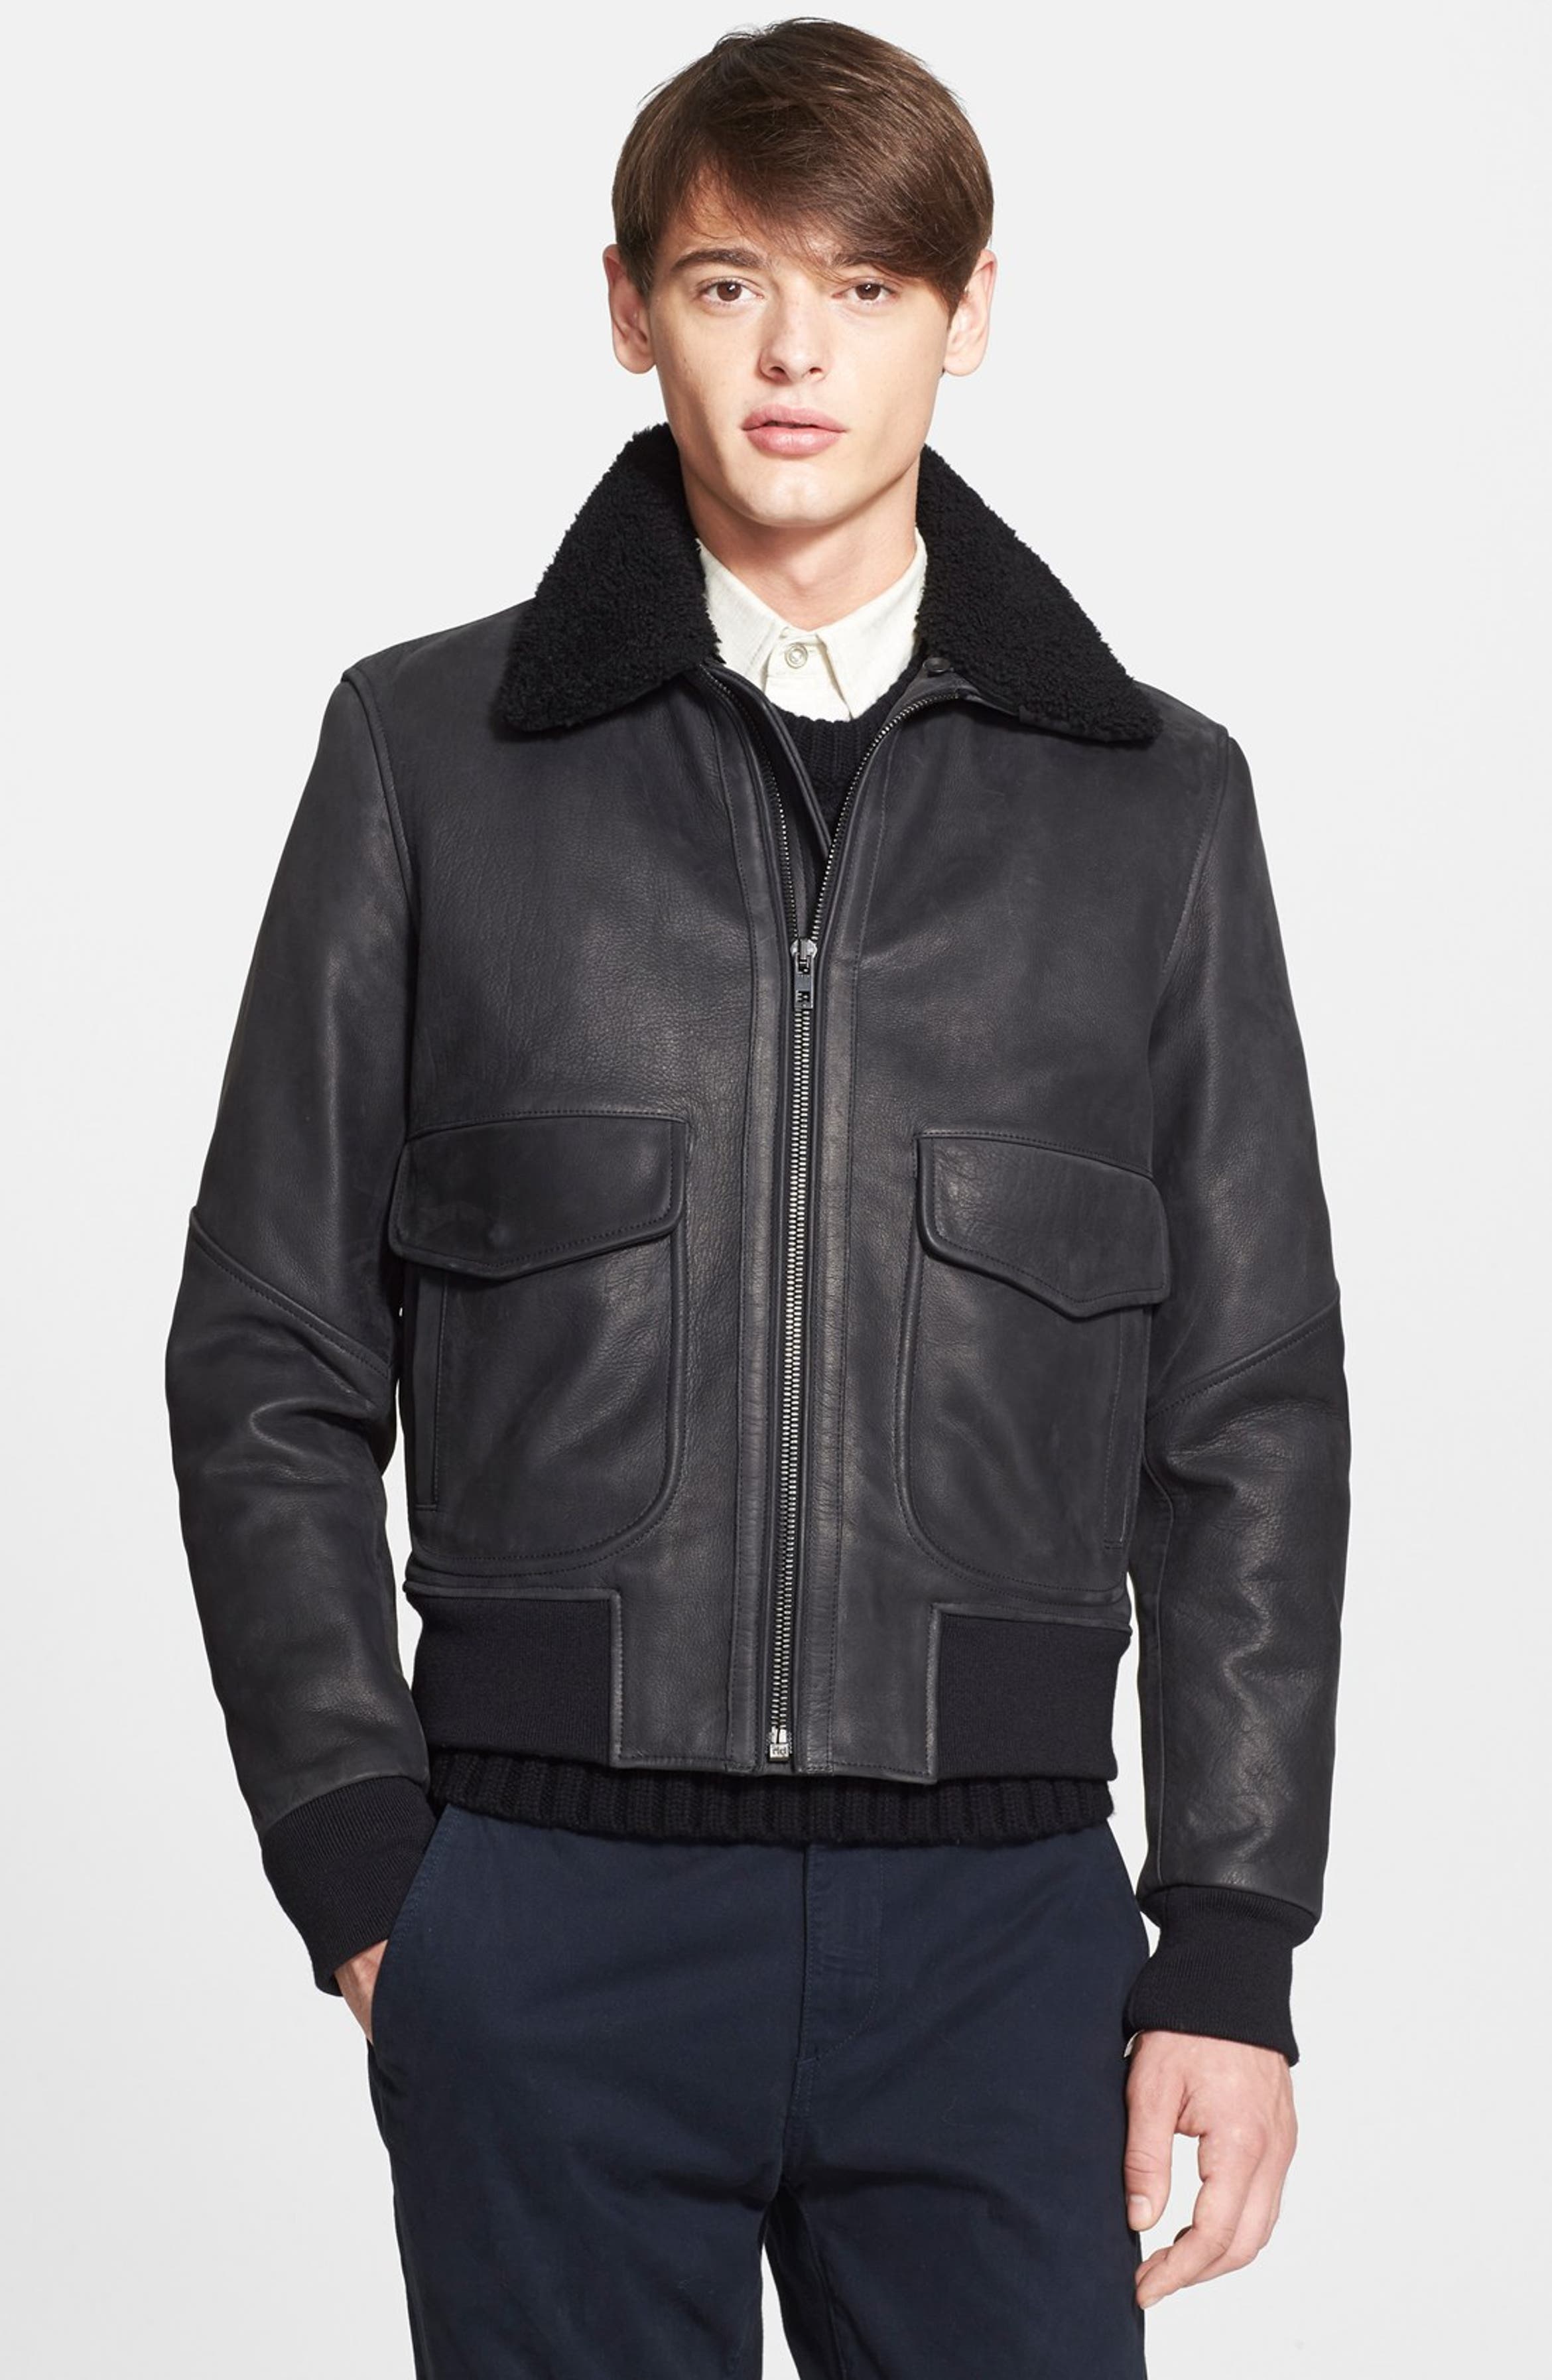 rag & bone 'Mitch' Leather Jacket with Genuine Shearling Collar | Nordstrom